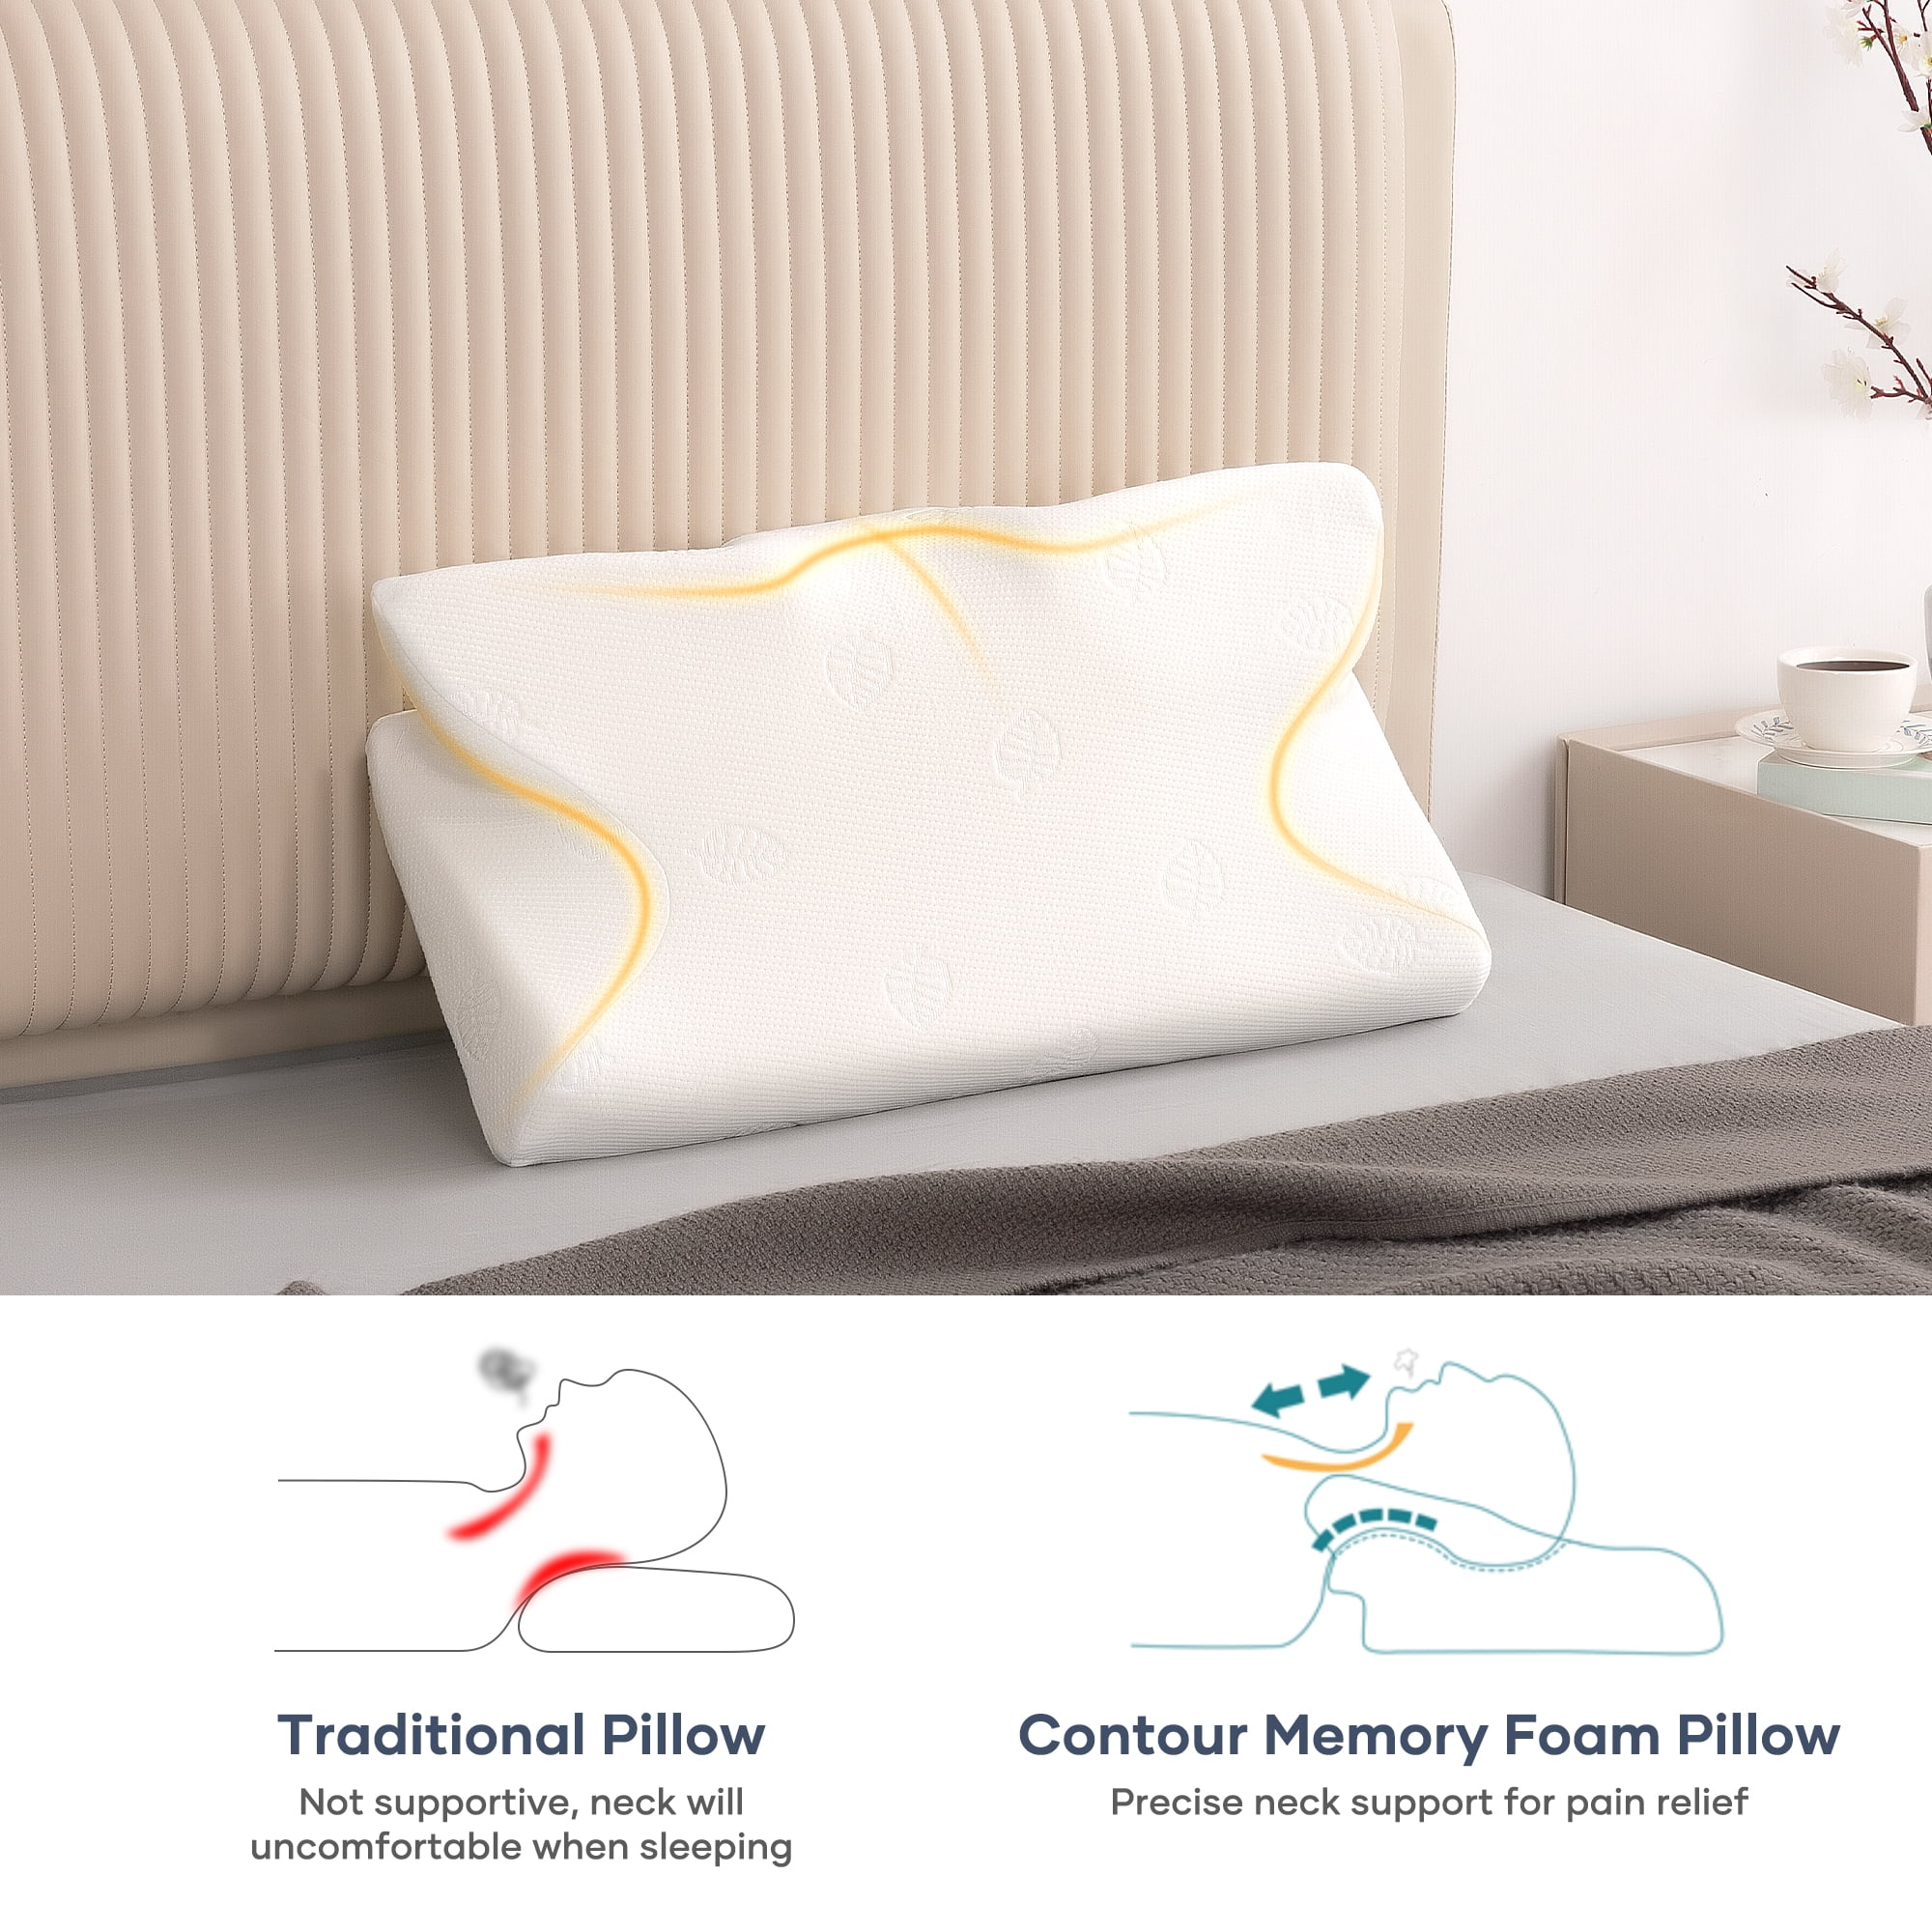 DREAMSIR SETORE Extra Firm Pillows for Sleeping,Neck Support Contour Pillow,Cervical,Orthopedic  Pillow for Neck